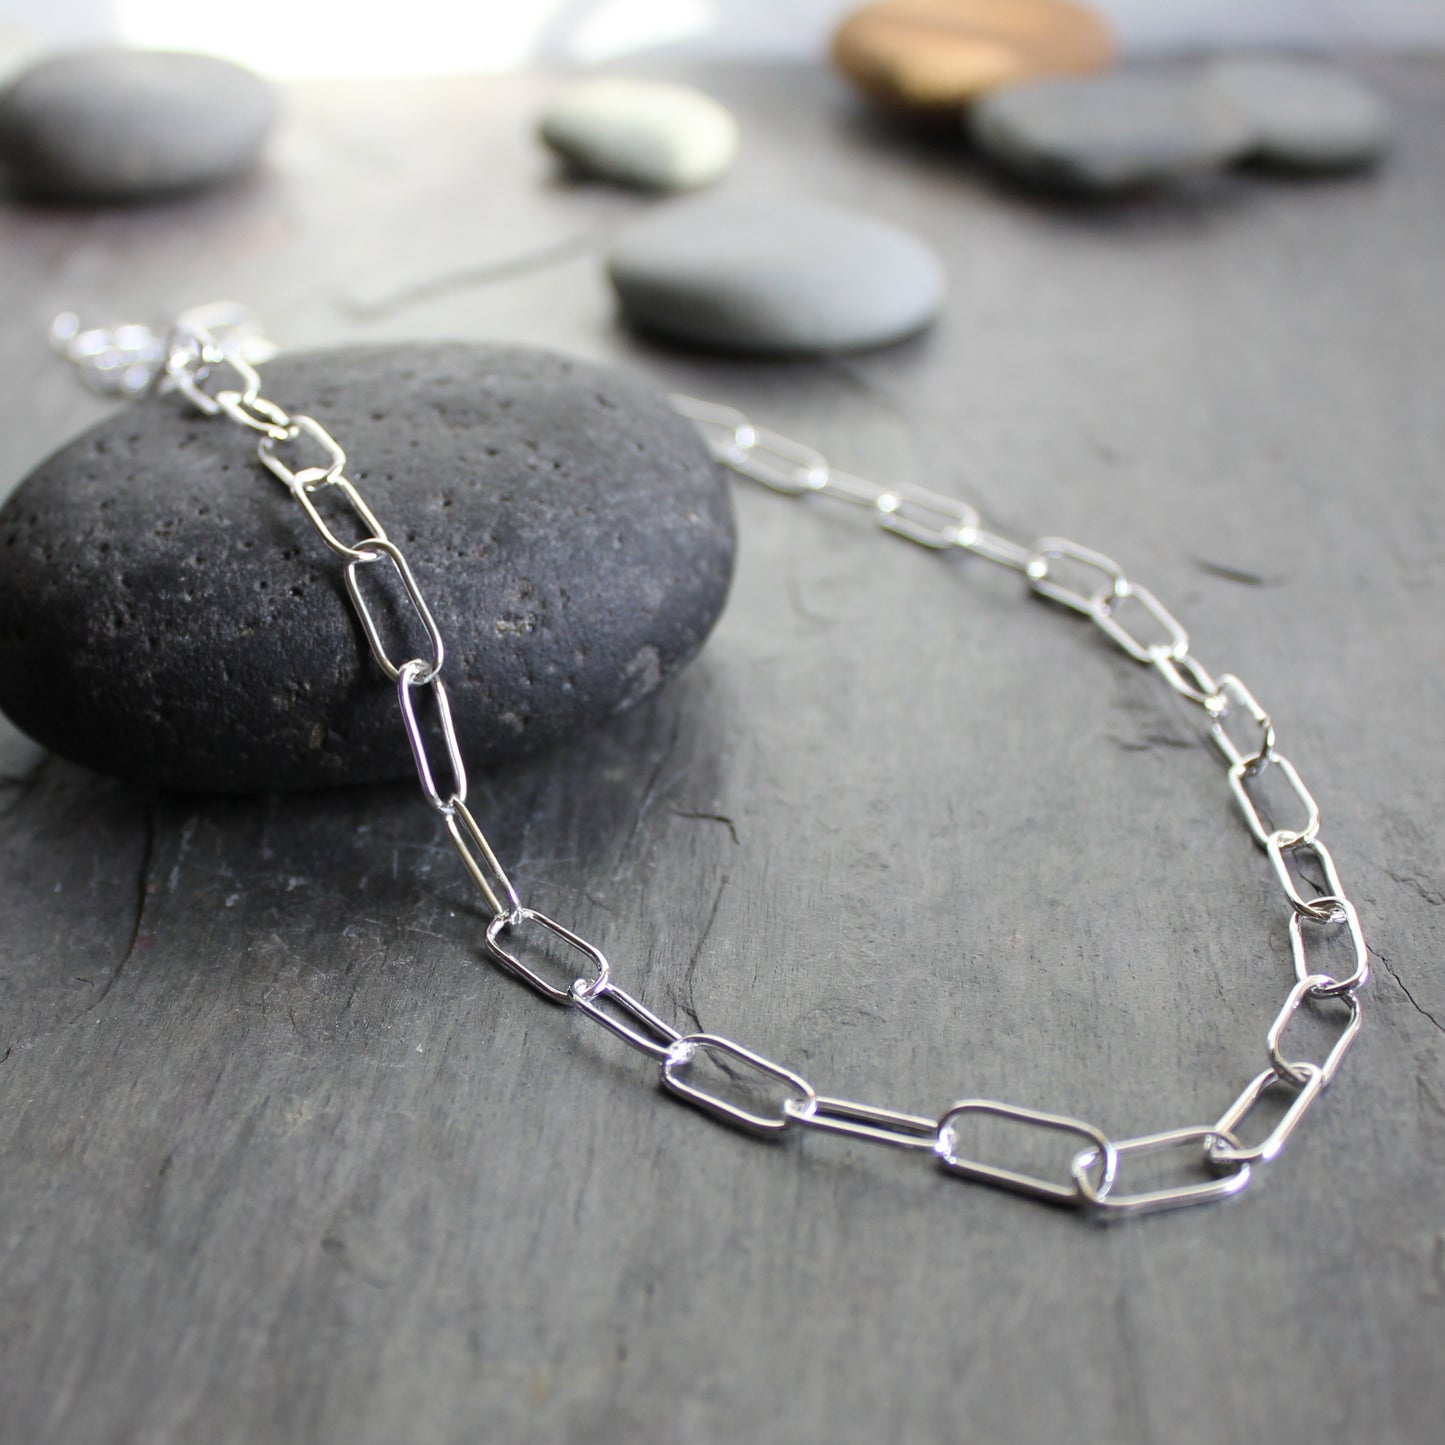 This is a handmade chain made with 18 gauge sterling silver wire. Each link is individually linked, soldered, and shaped by hand. 